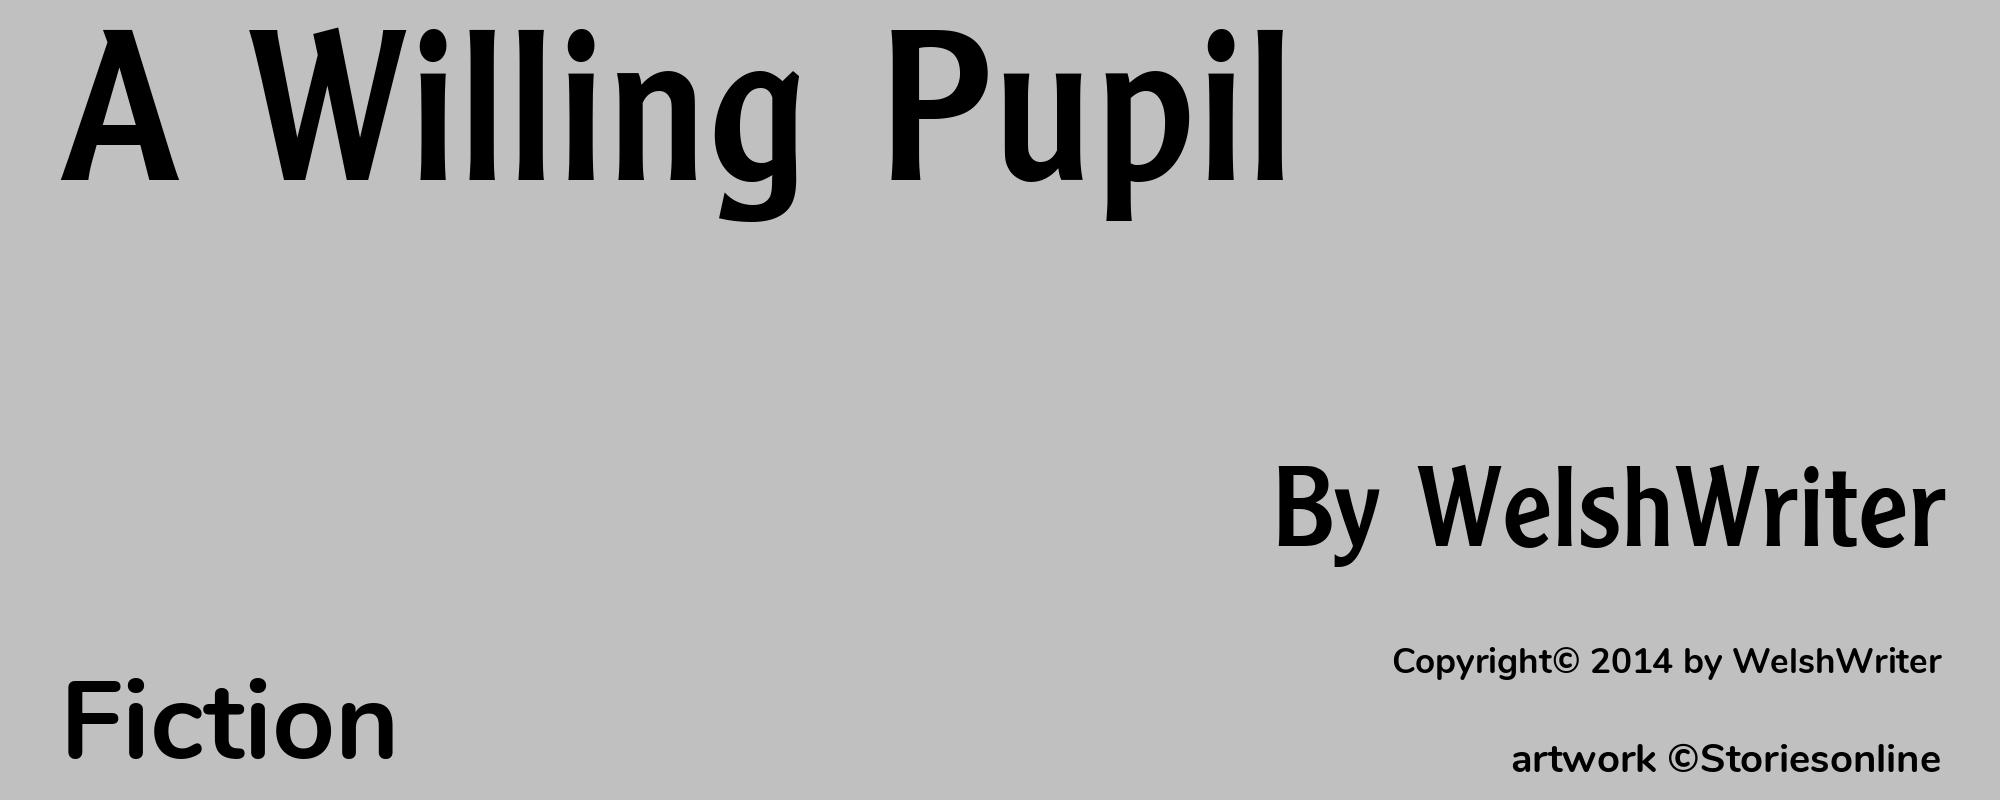 A Willing Pupil - Cover